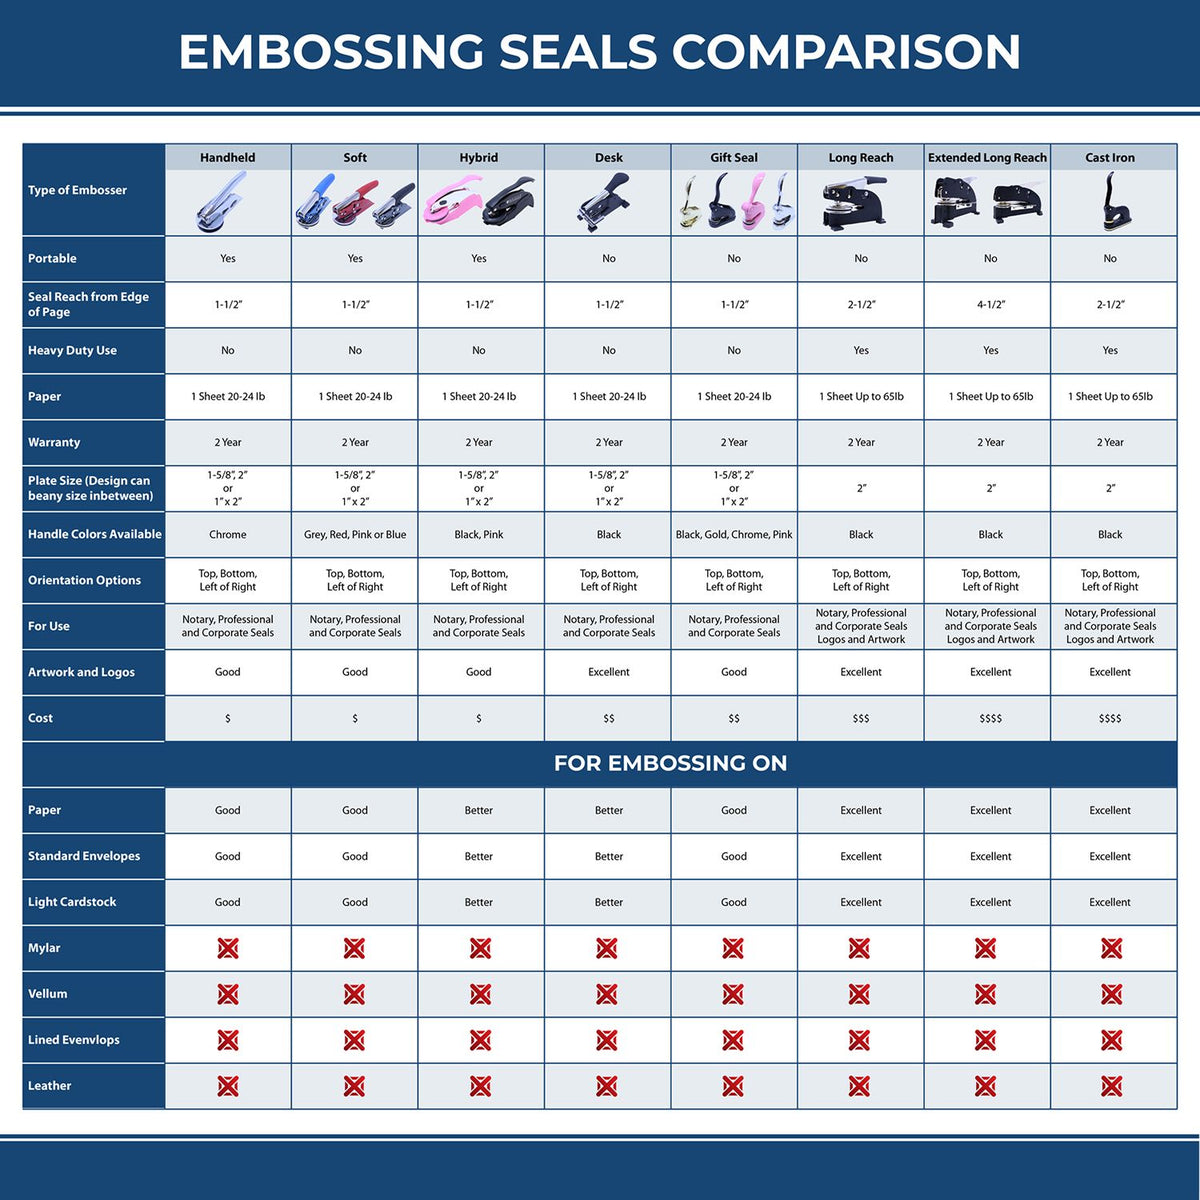 A comparison chart for the different types of mount models available for the Georgia Desk Surveyor Seal Embosser.